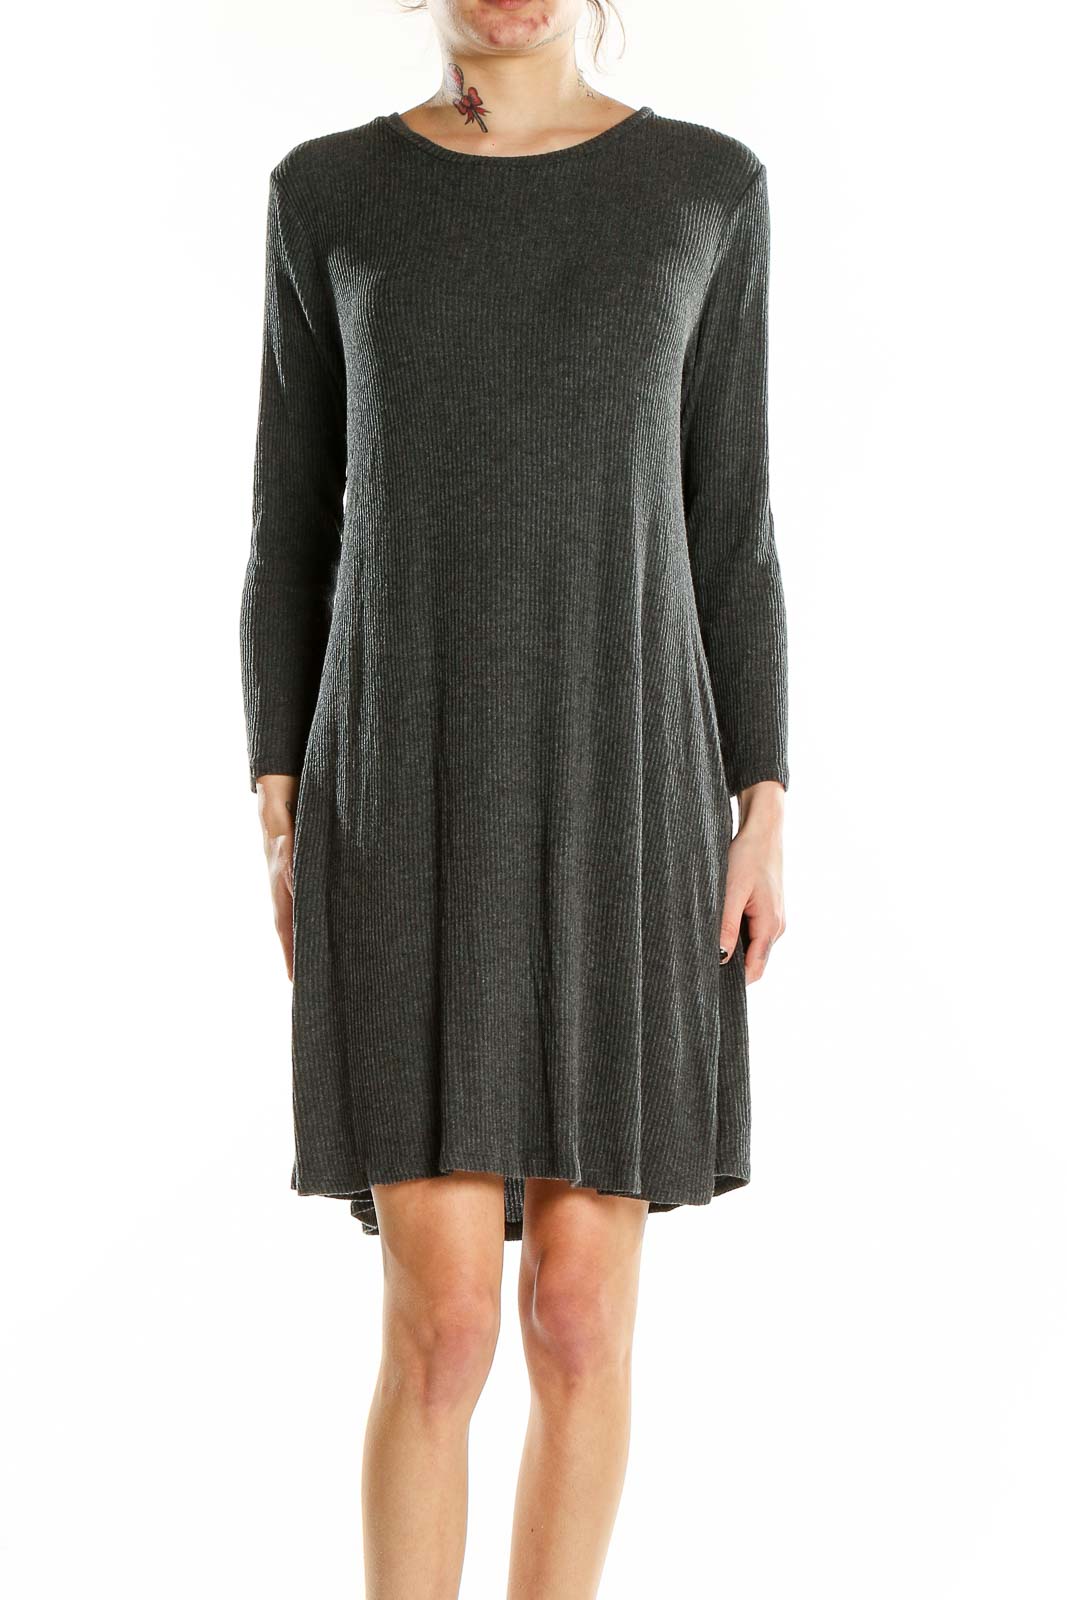 Gray Sweater Dress Front